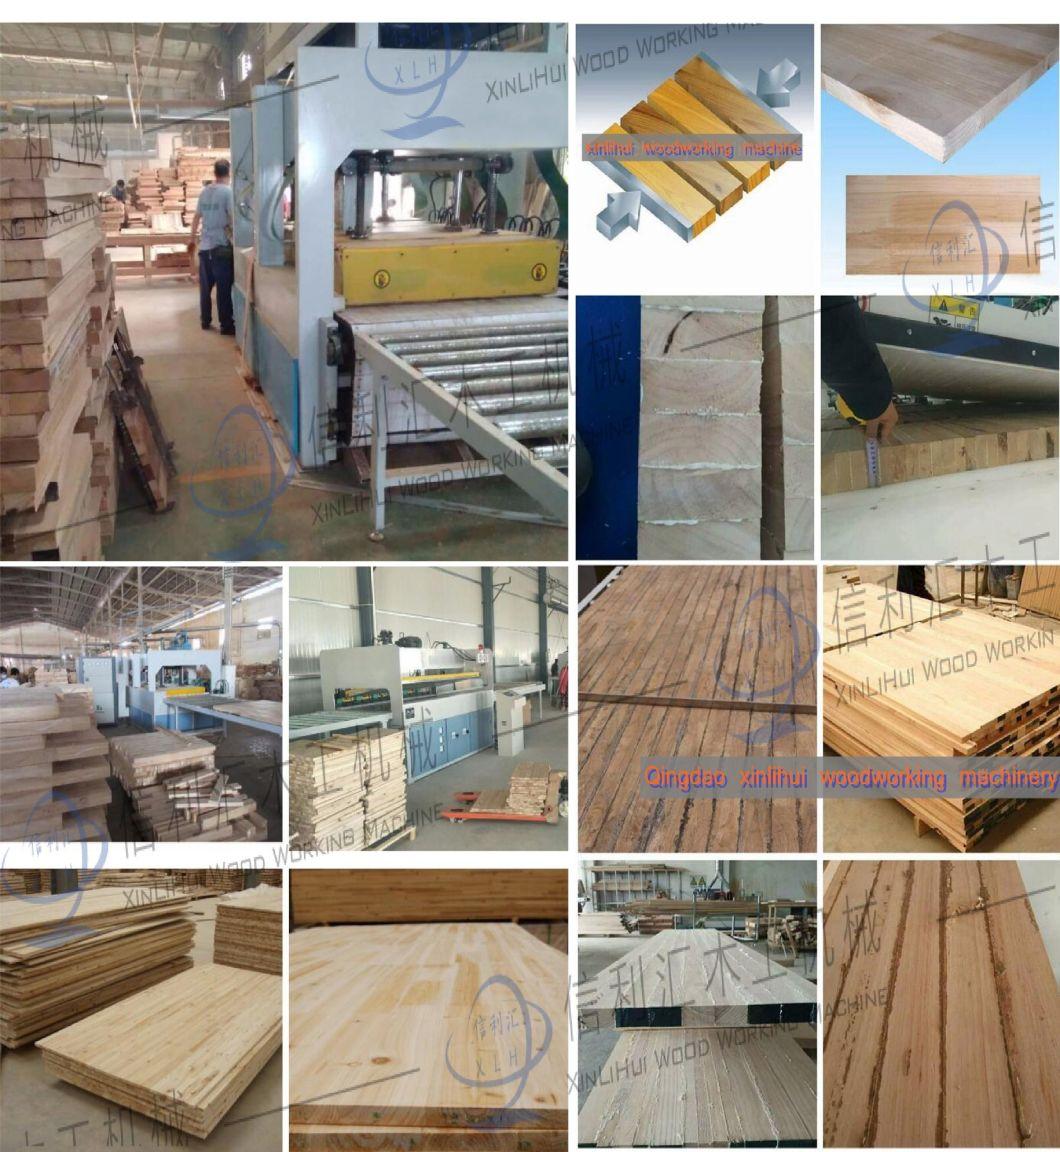 High Frequency Power Glue Machine Wood Finger Jointer Press Equipment Used Woodworking Machines, Hot Press Machine, Used High Frequency Wood Joint Machine